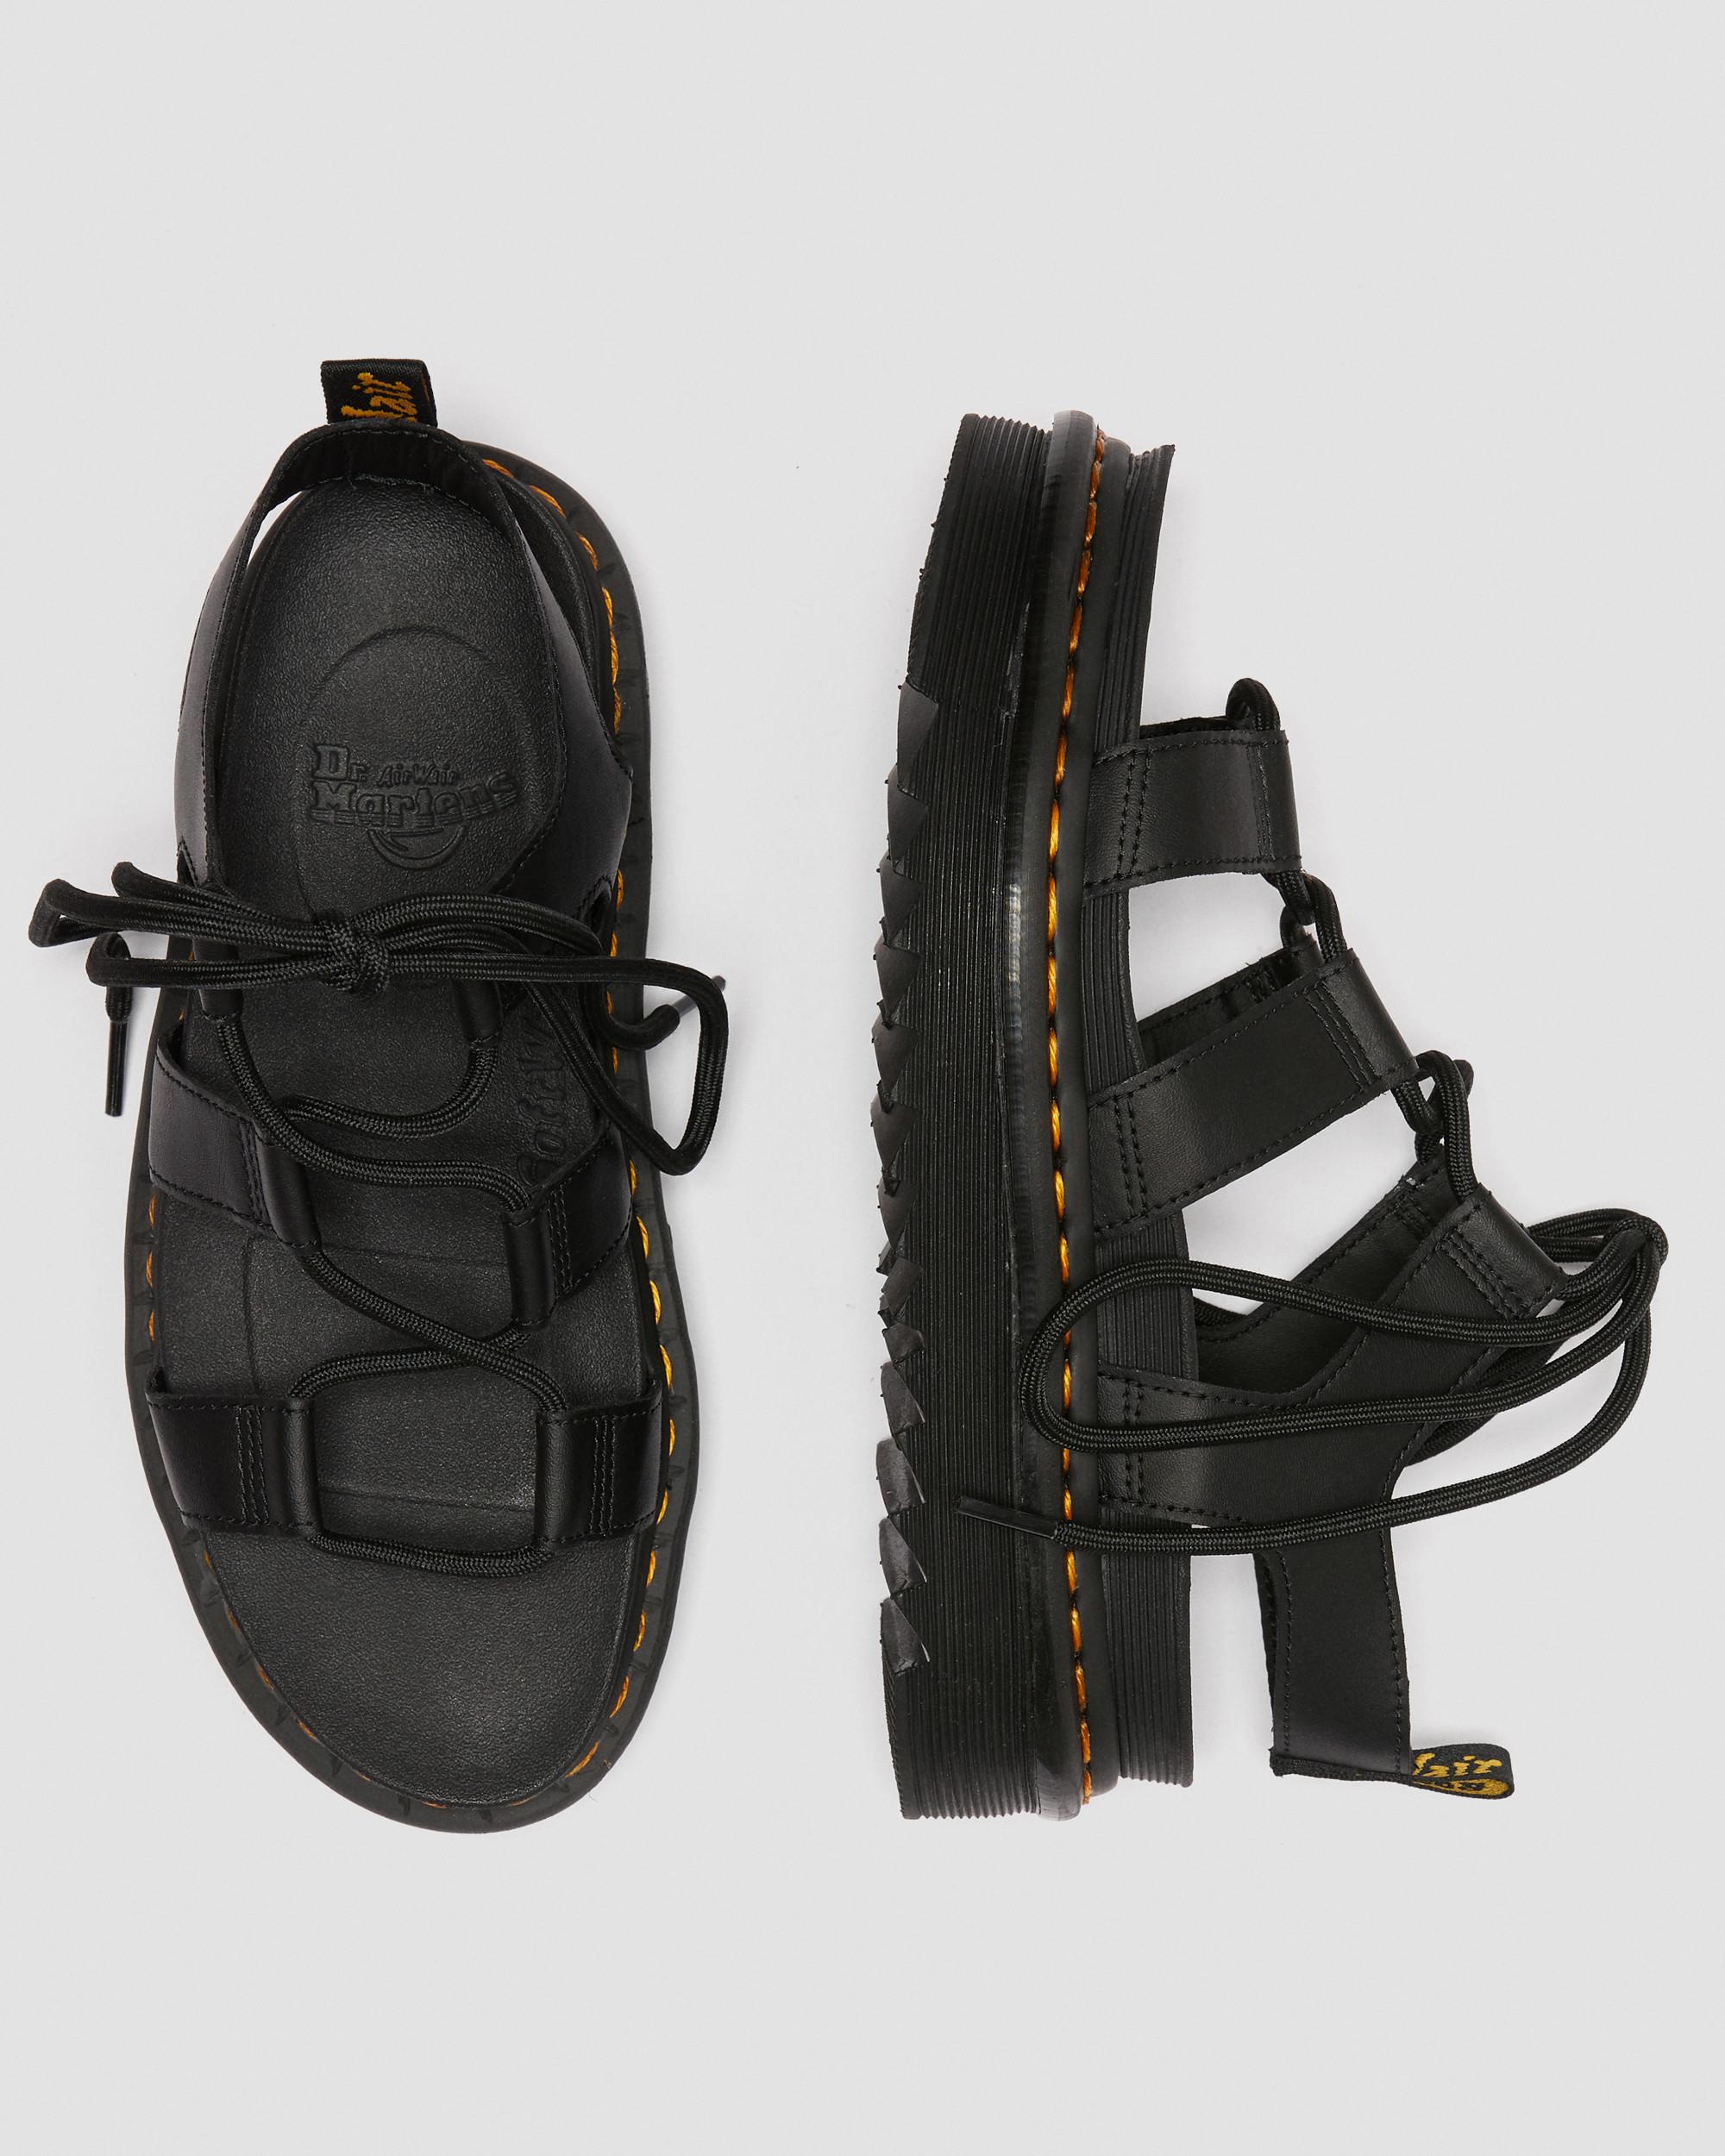 Nartilla Hydro Leather Lace Up Gladiator SandalsNartilla Hydro Leather Lace Up Gladiator Sandals Dr. Martens